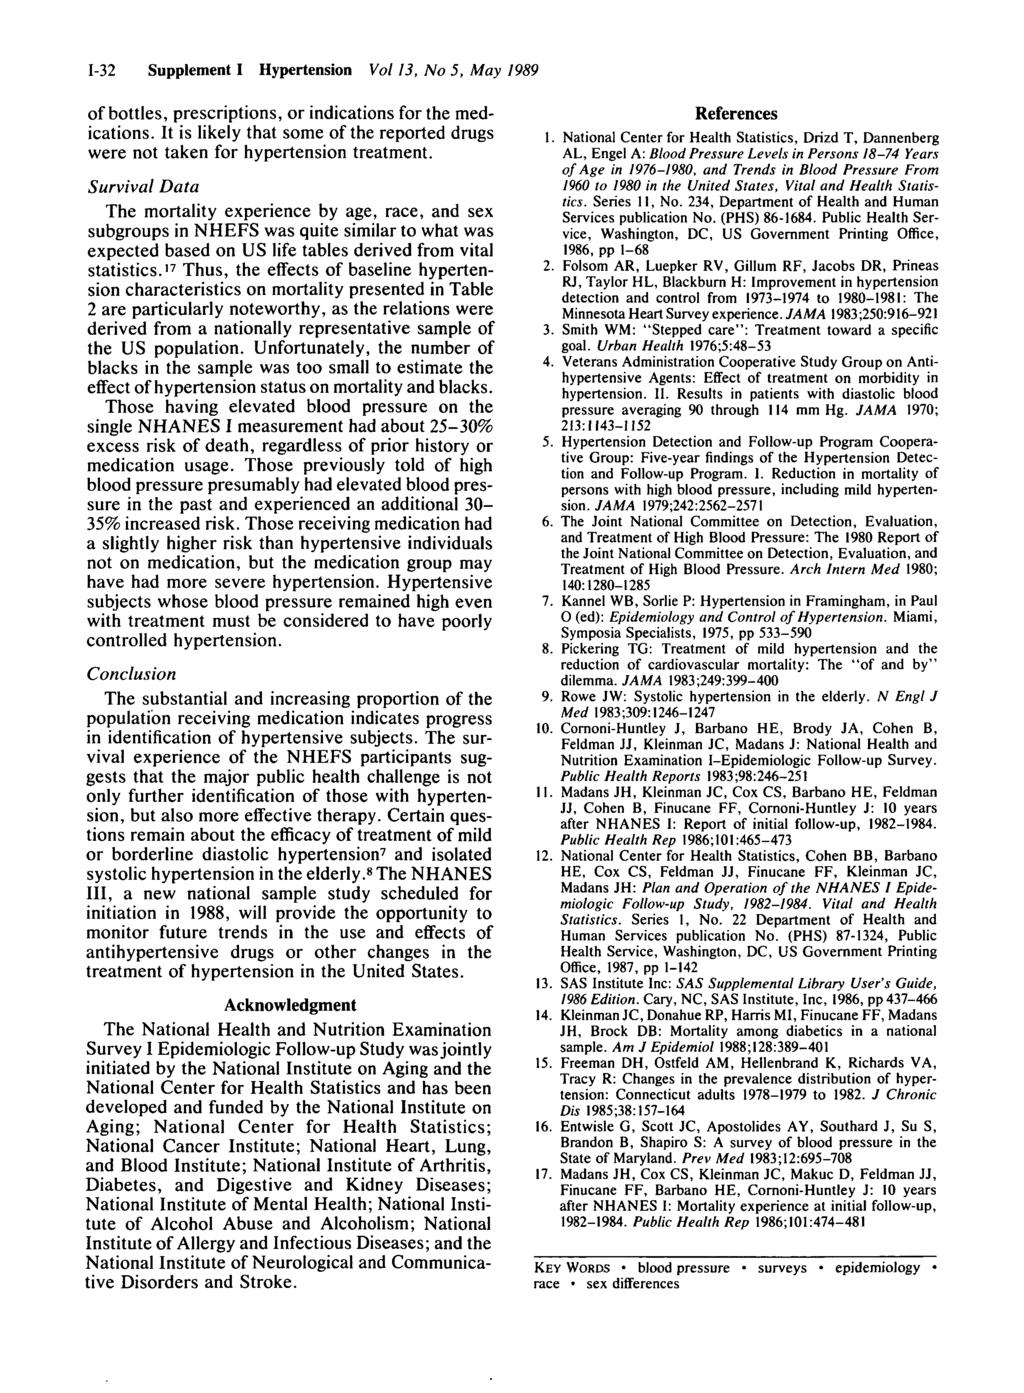 1-32 Supplement I Hypertension Vol 13, No 5, May 1989 of bottles, prescriptions, or indications for the medications.